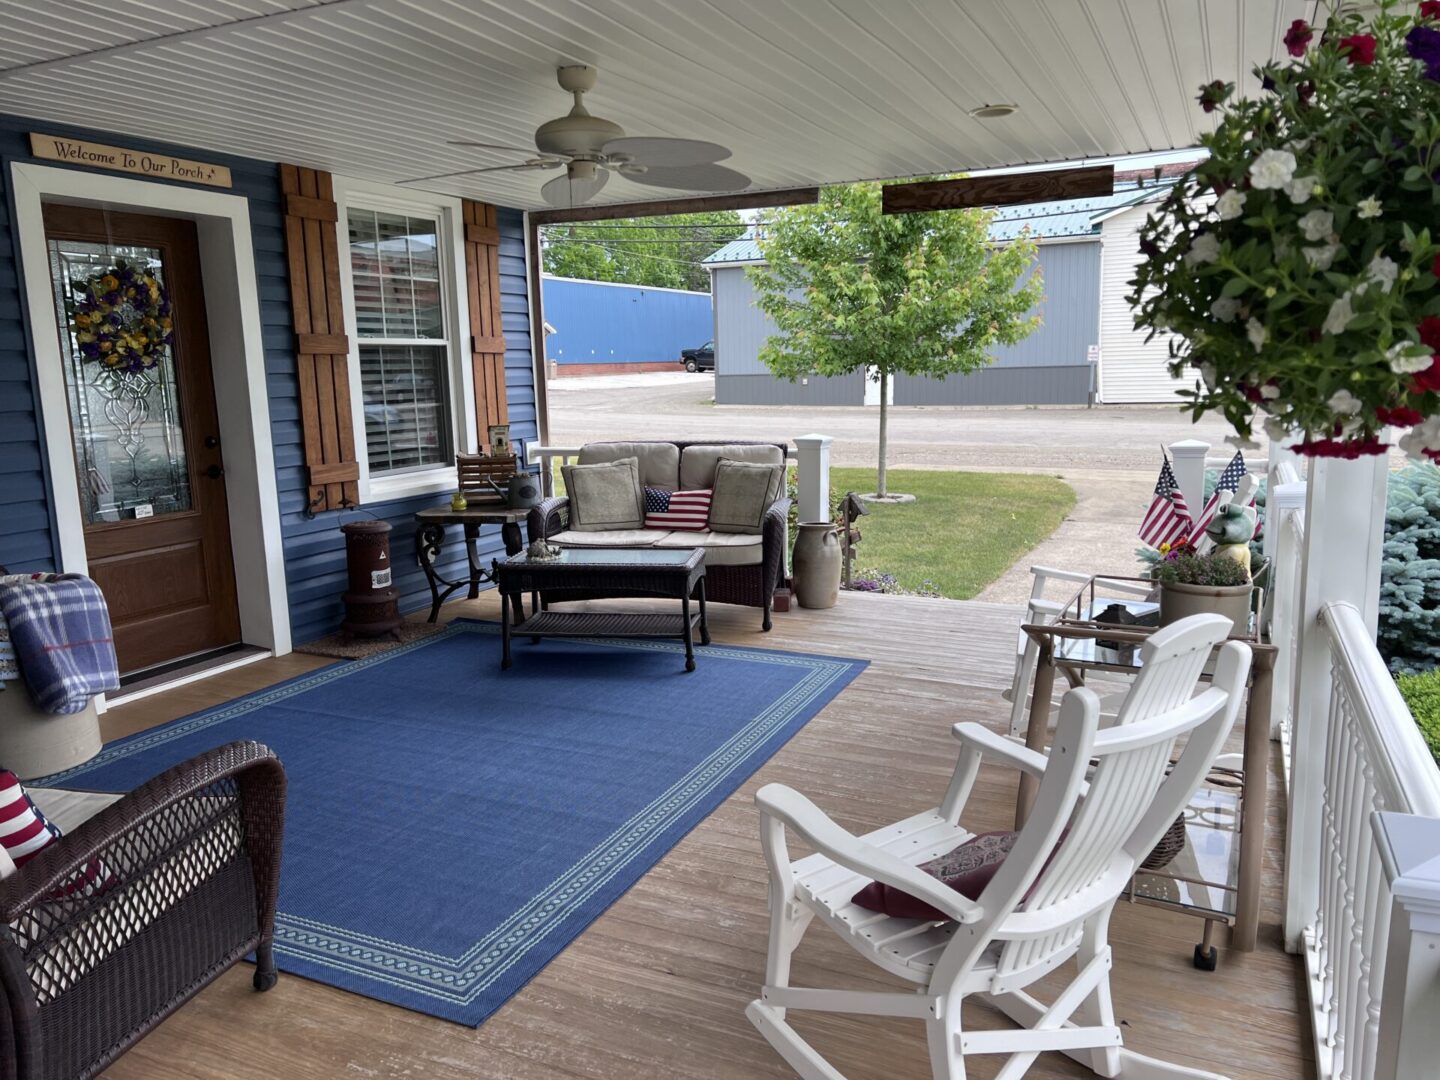 A porch with rocking chairs and a rug.